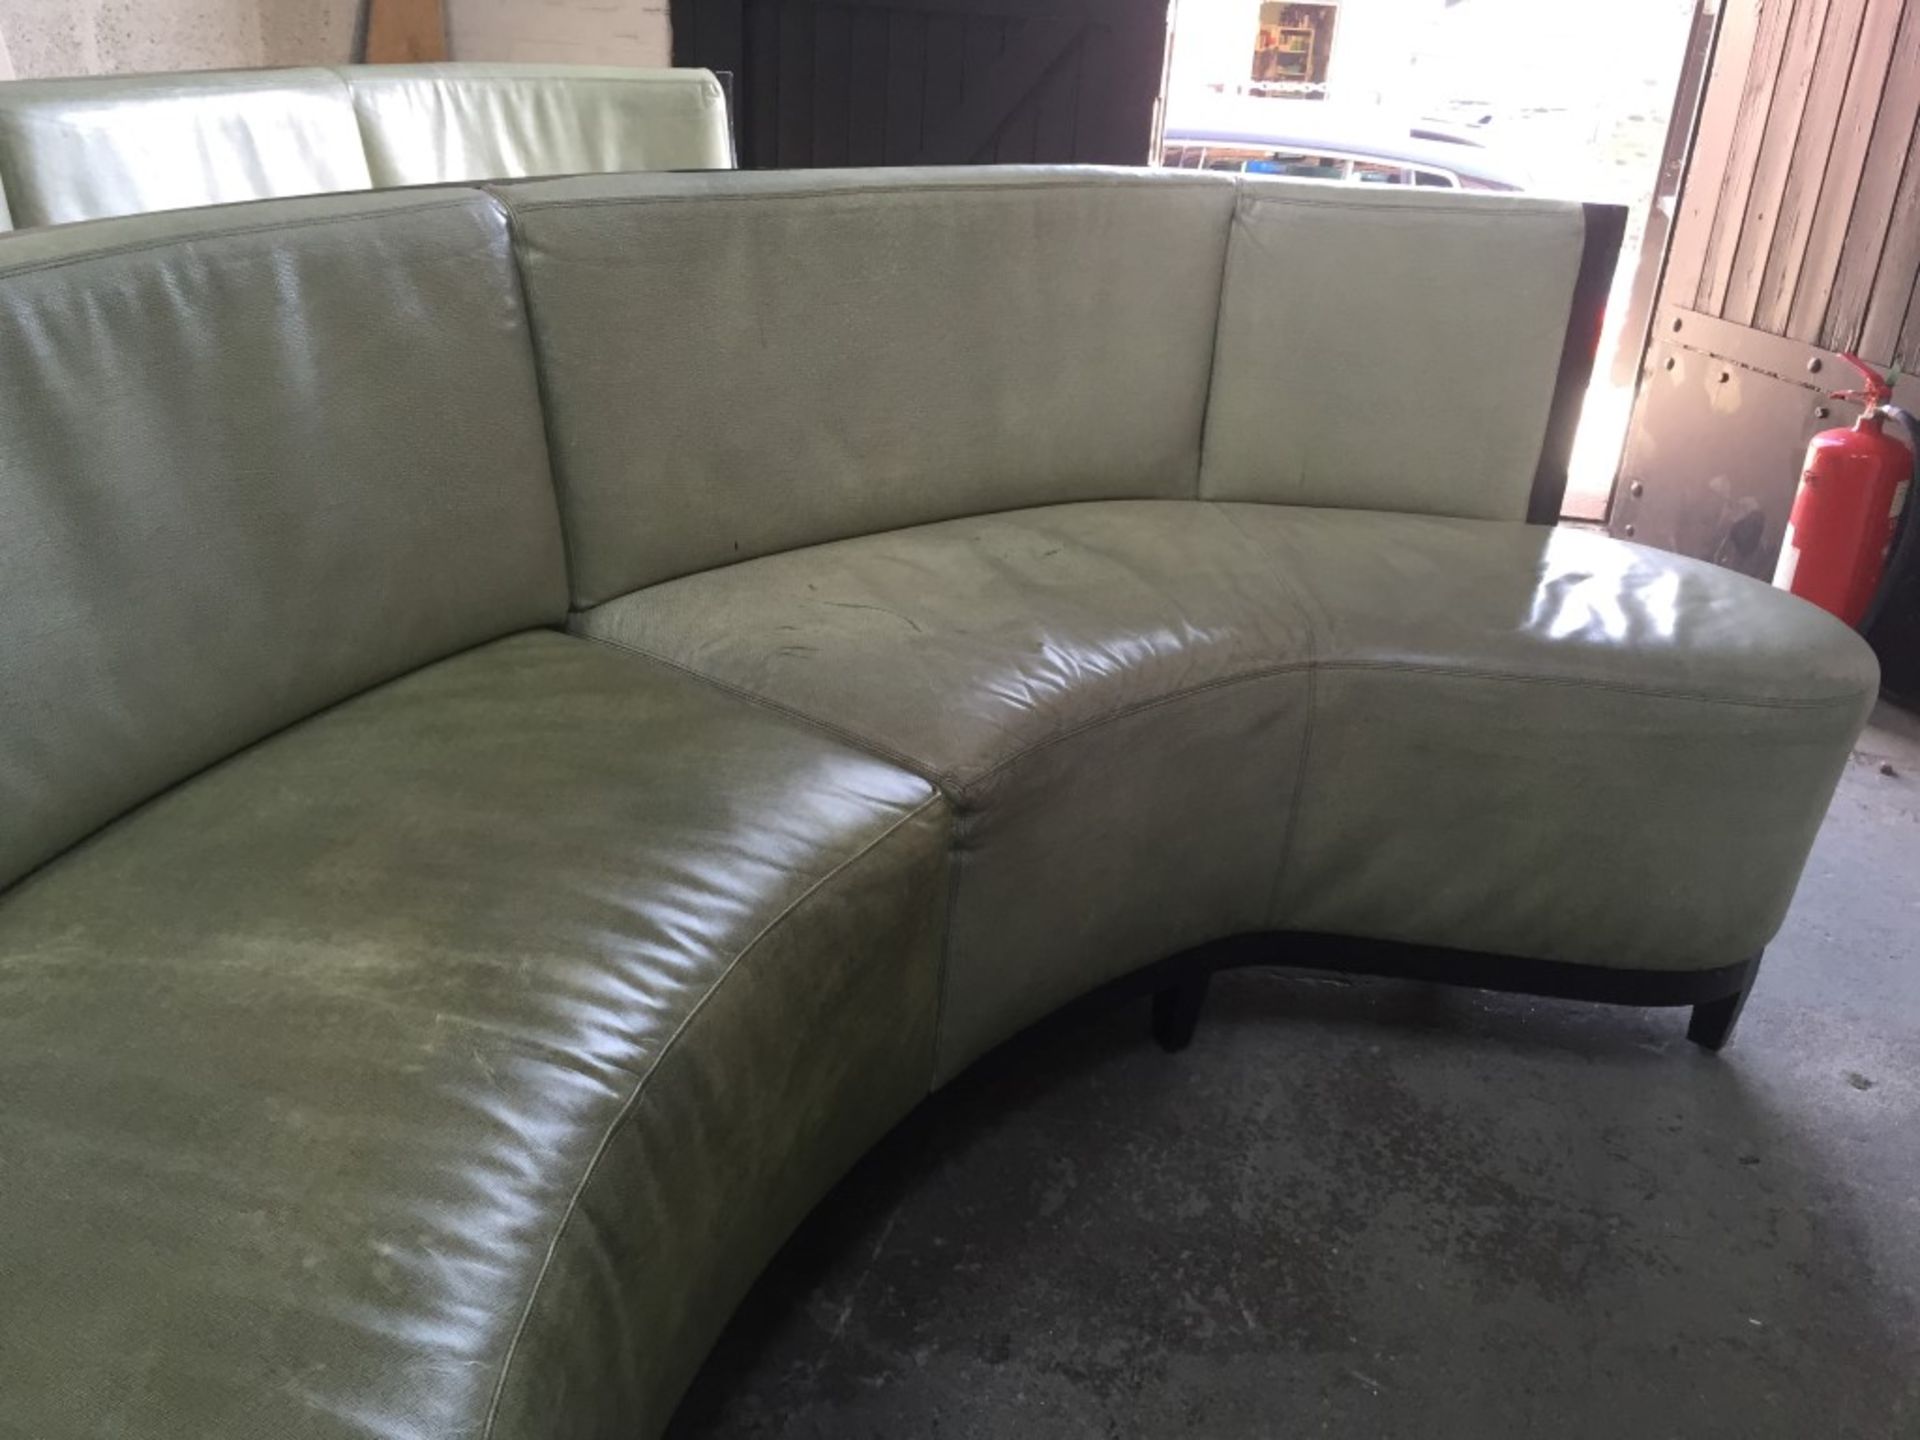 1 x Luxury Upholstered Curved Seating Area - Recently Removed From Nobu - Dimensions: W285 x D62cm x - Image 7 of 23